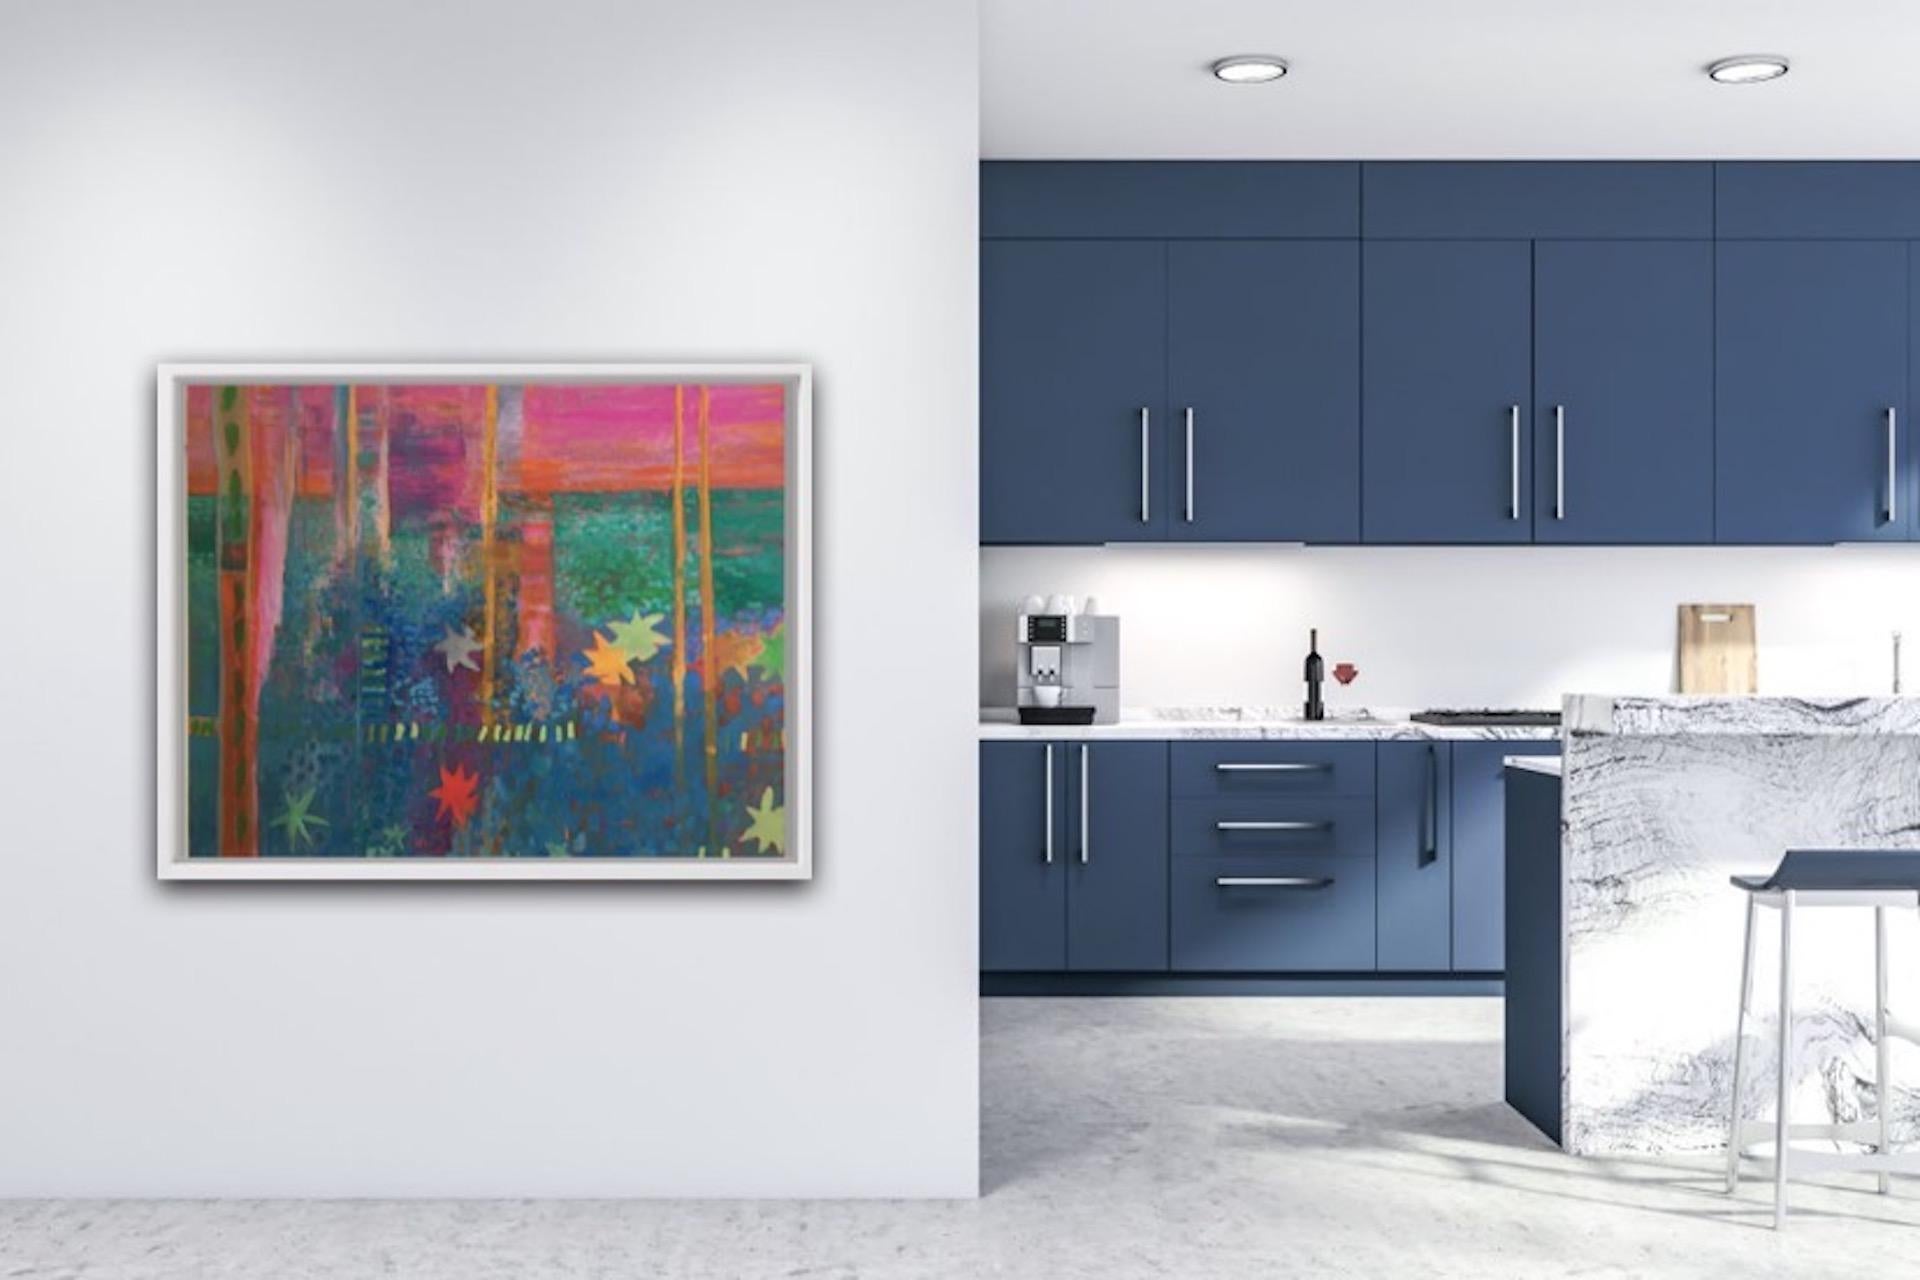 Teresa Pemberton
Floating Garden
Original Abstract Painting
Oil Paint on Canvas
Canvas Size: H 87cm x W 107cm
Sold Unframed
Please note that in situ images are purely an indication of how a piece may look.

Floating Garden is an original abstract